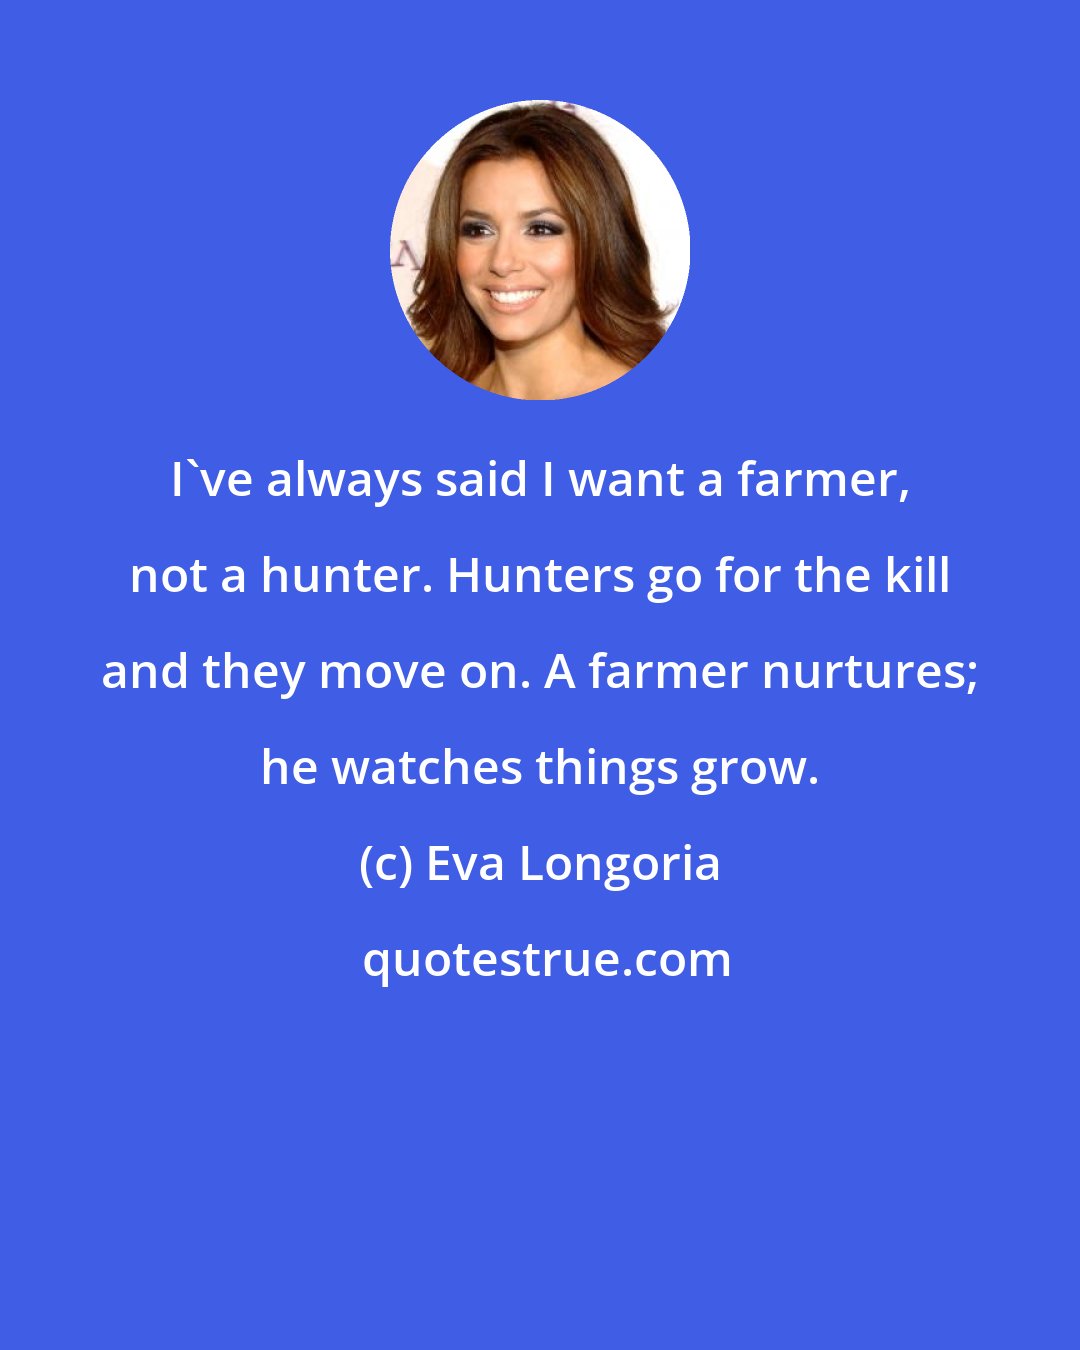 Eva Longoria: I've always said I want a farmer, not a hunter. Hunters go for the kill and they move on. A farmer nurtures; he watches things grow.